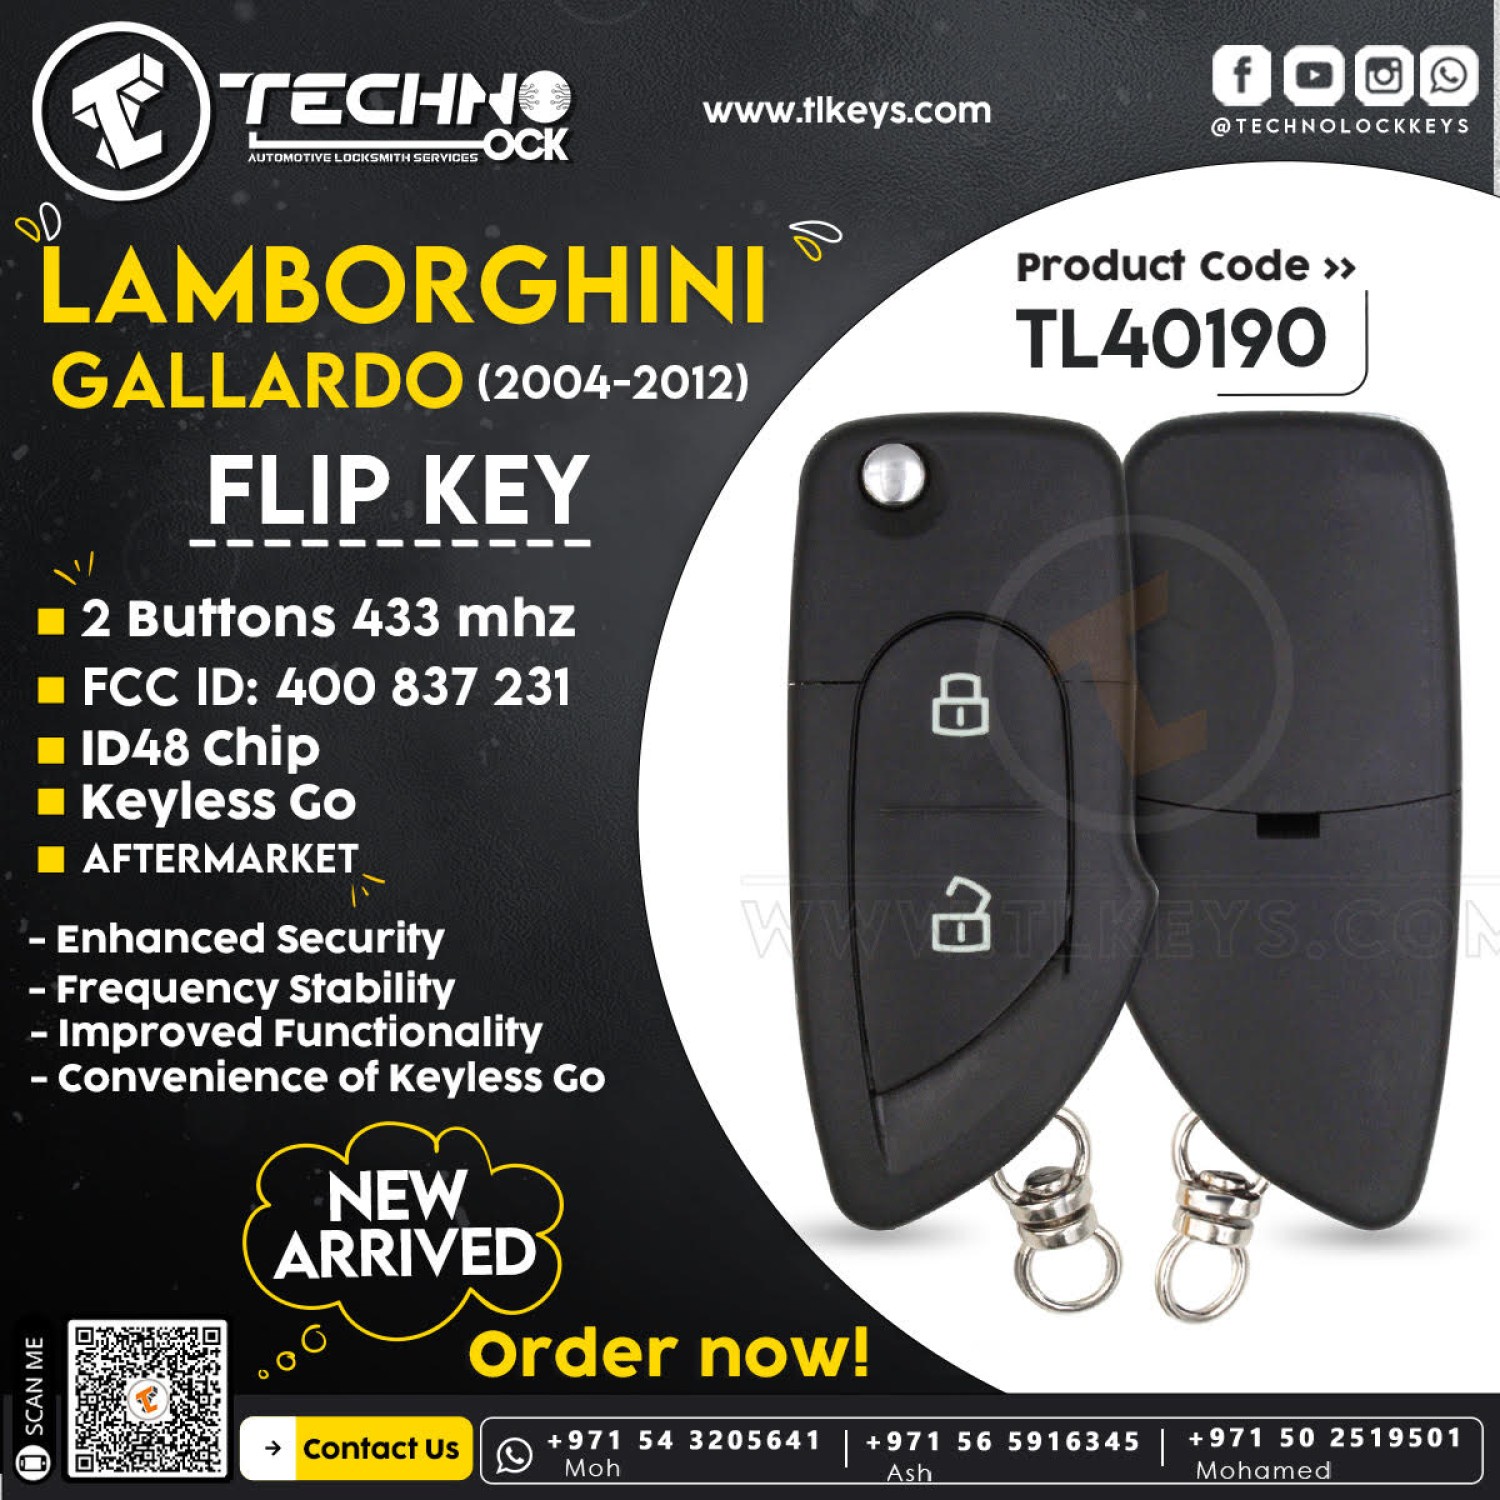 Unveiling the Lamborghini Flip Key 2 Buttons 433MHz Aftermarket Wonder with FCC ID: 400 837 231